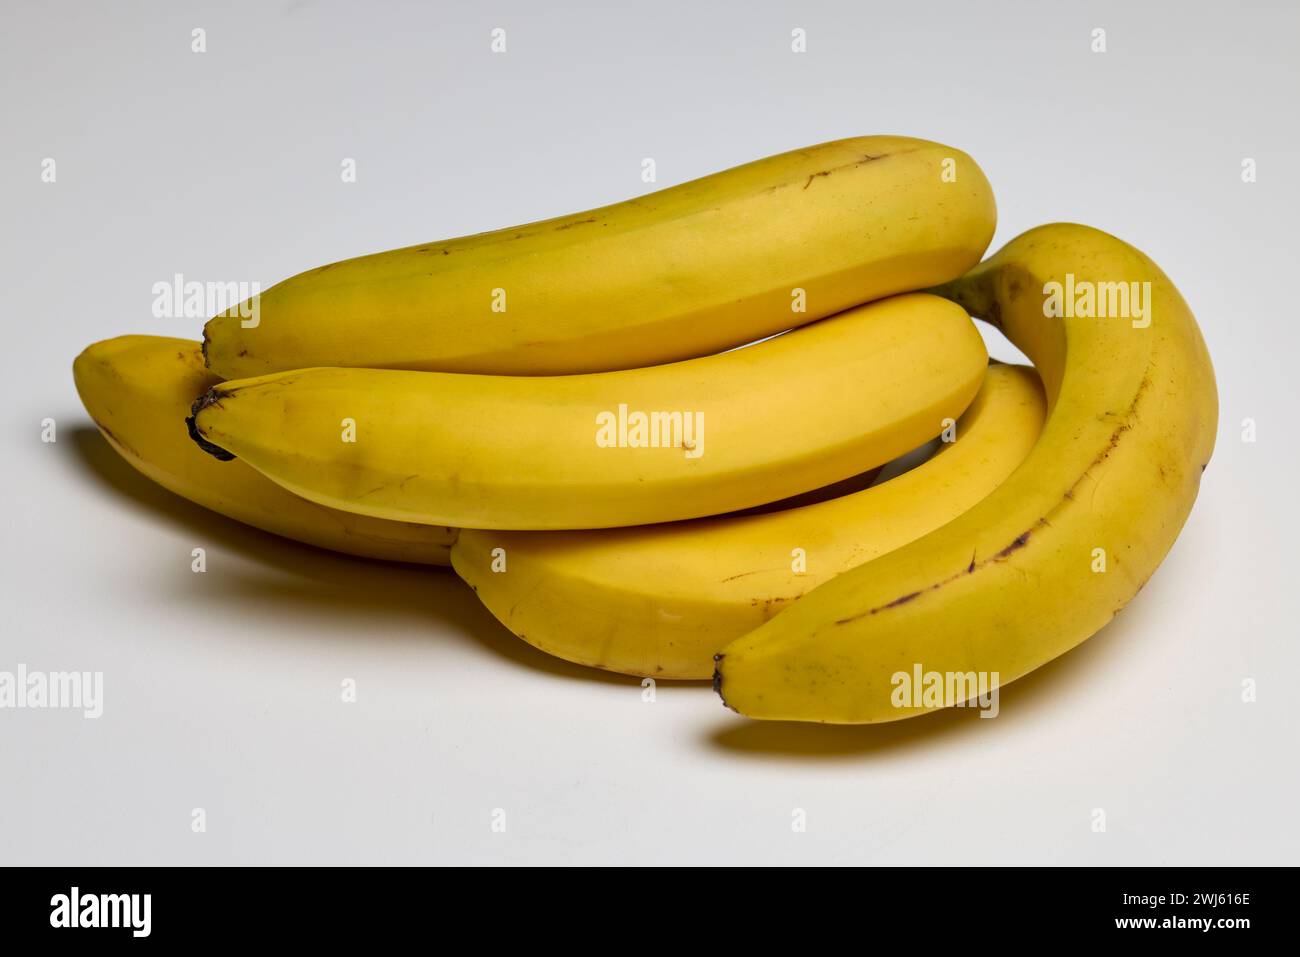 Well-ripened organic bananas on a counter. Stock Photo